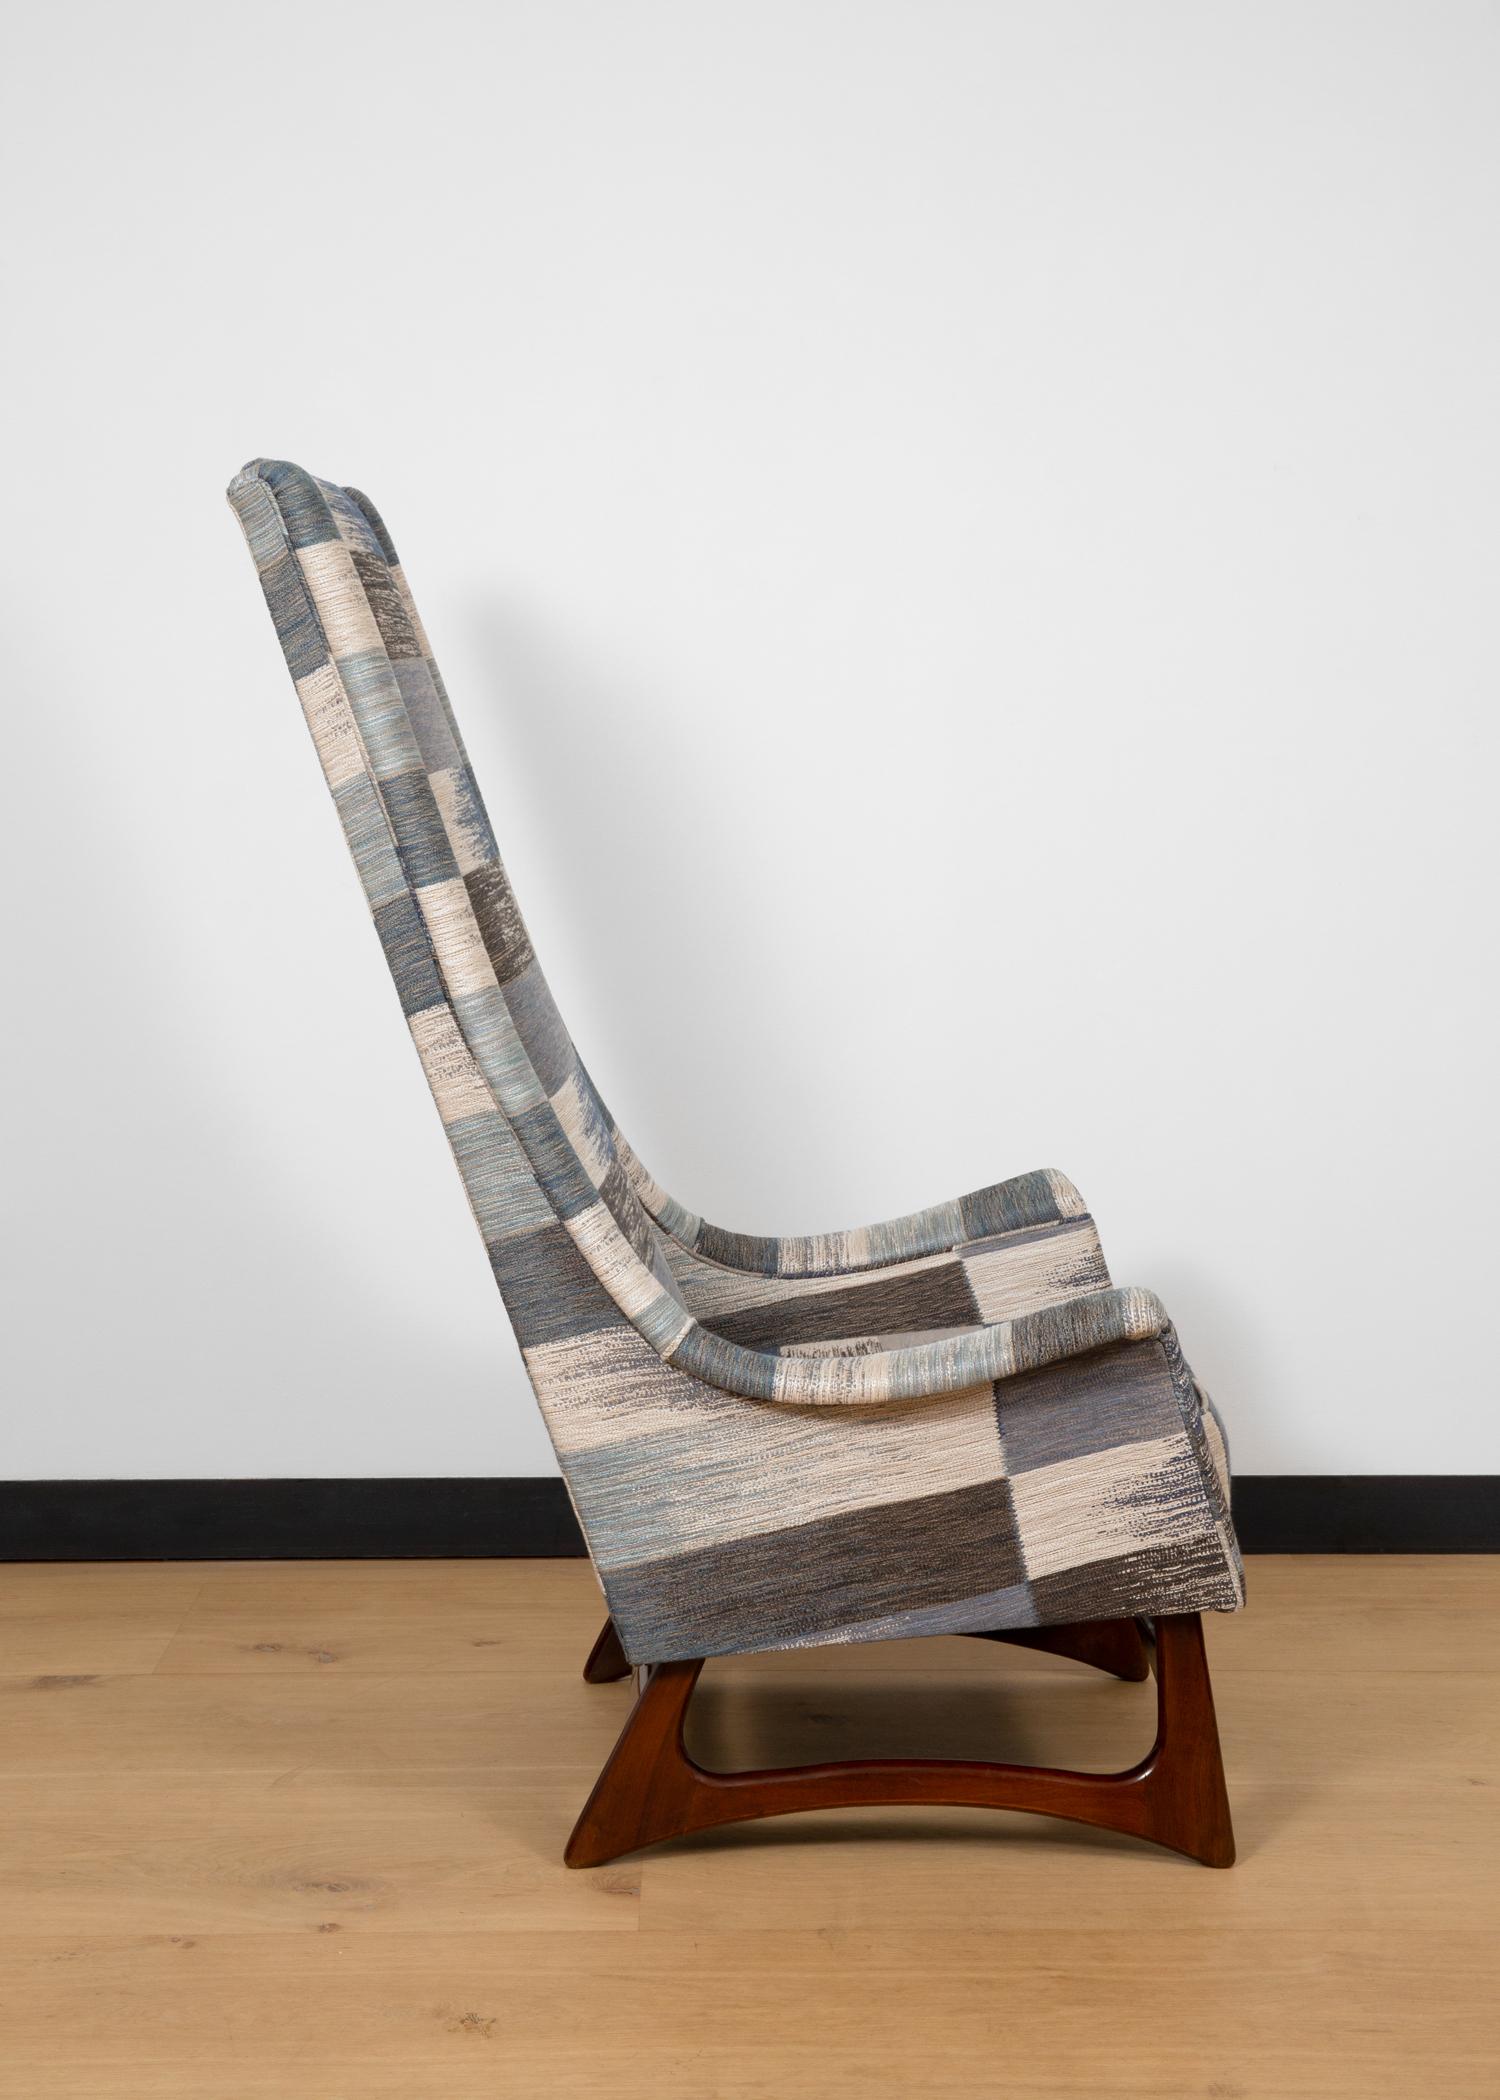 A very tall high back armchair designed by Adrian Pearsall for Craft Associates.
The sculptural sled style base is made from solid walnut and the chair features new upholstery 'Ikat Weave' designed by acclaimed British Interior Designer Kit Kemp,